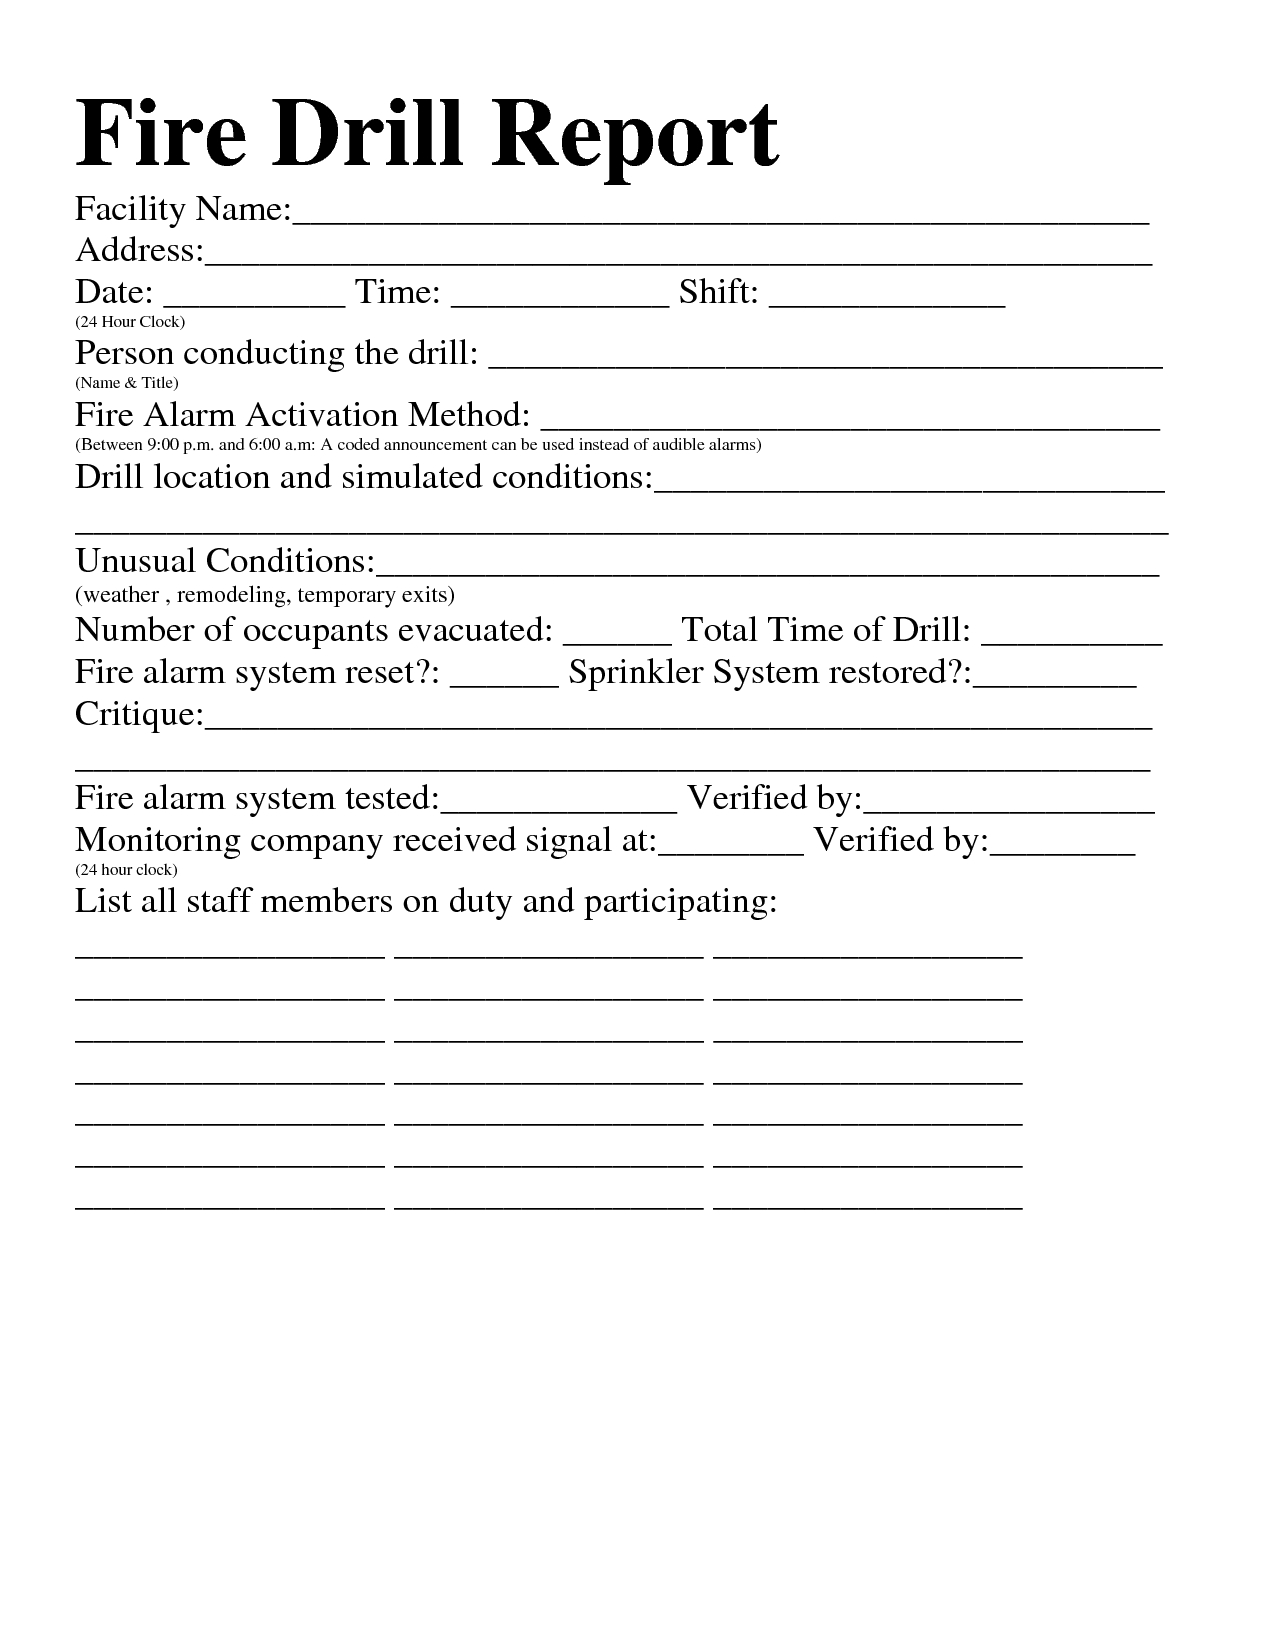 22 Images Of Osha Fire Drill Safety Template | Jackmonster For Emergency Drill Report Template